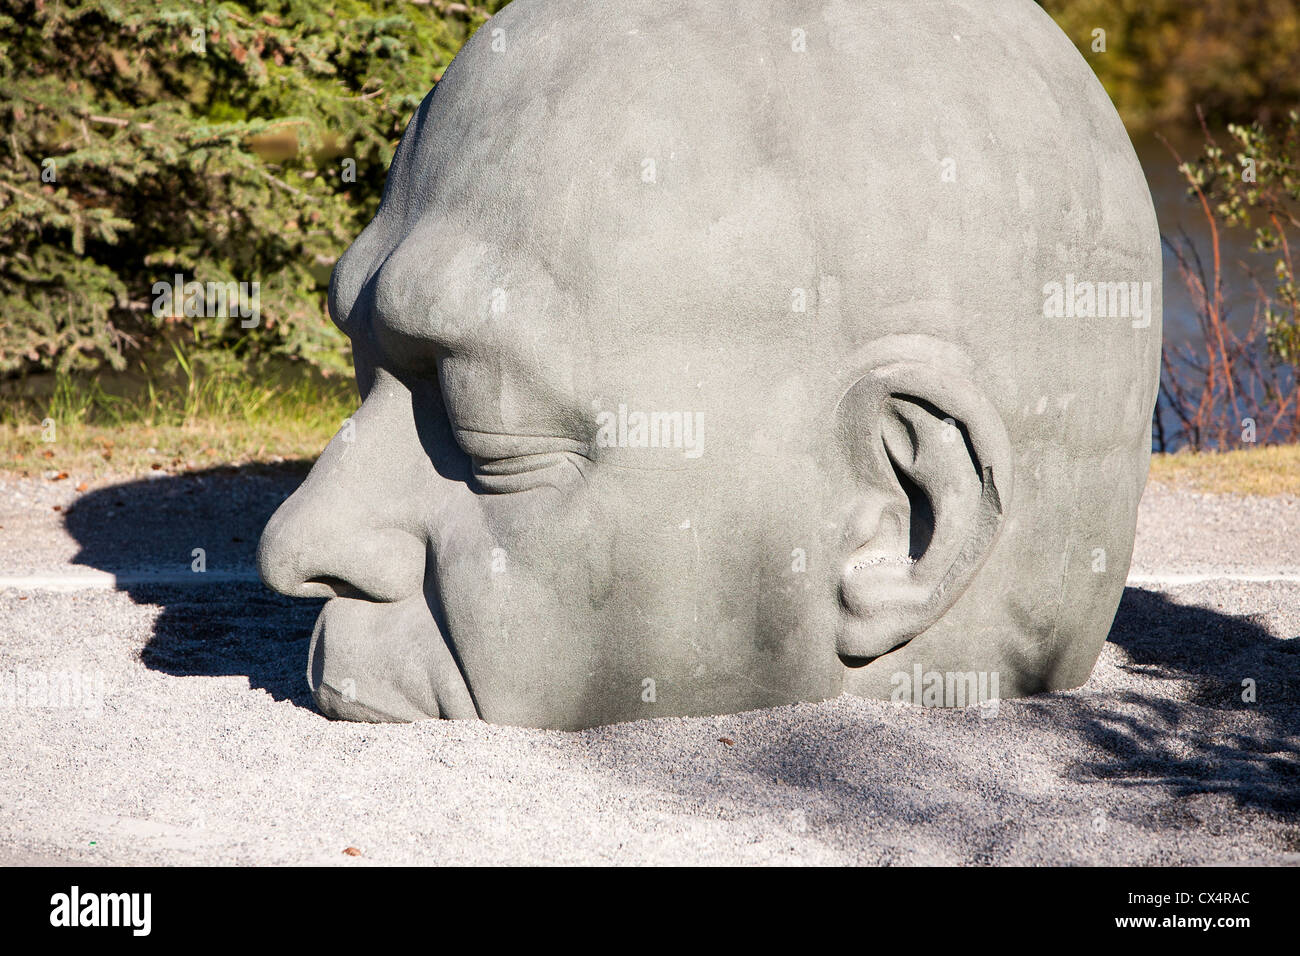 A sculpture named Big Head, a translation of the Gaelic Ceann Mór, a variation of Canmore's name in Canmore, Rocky mountains, Stock Photo